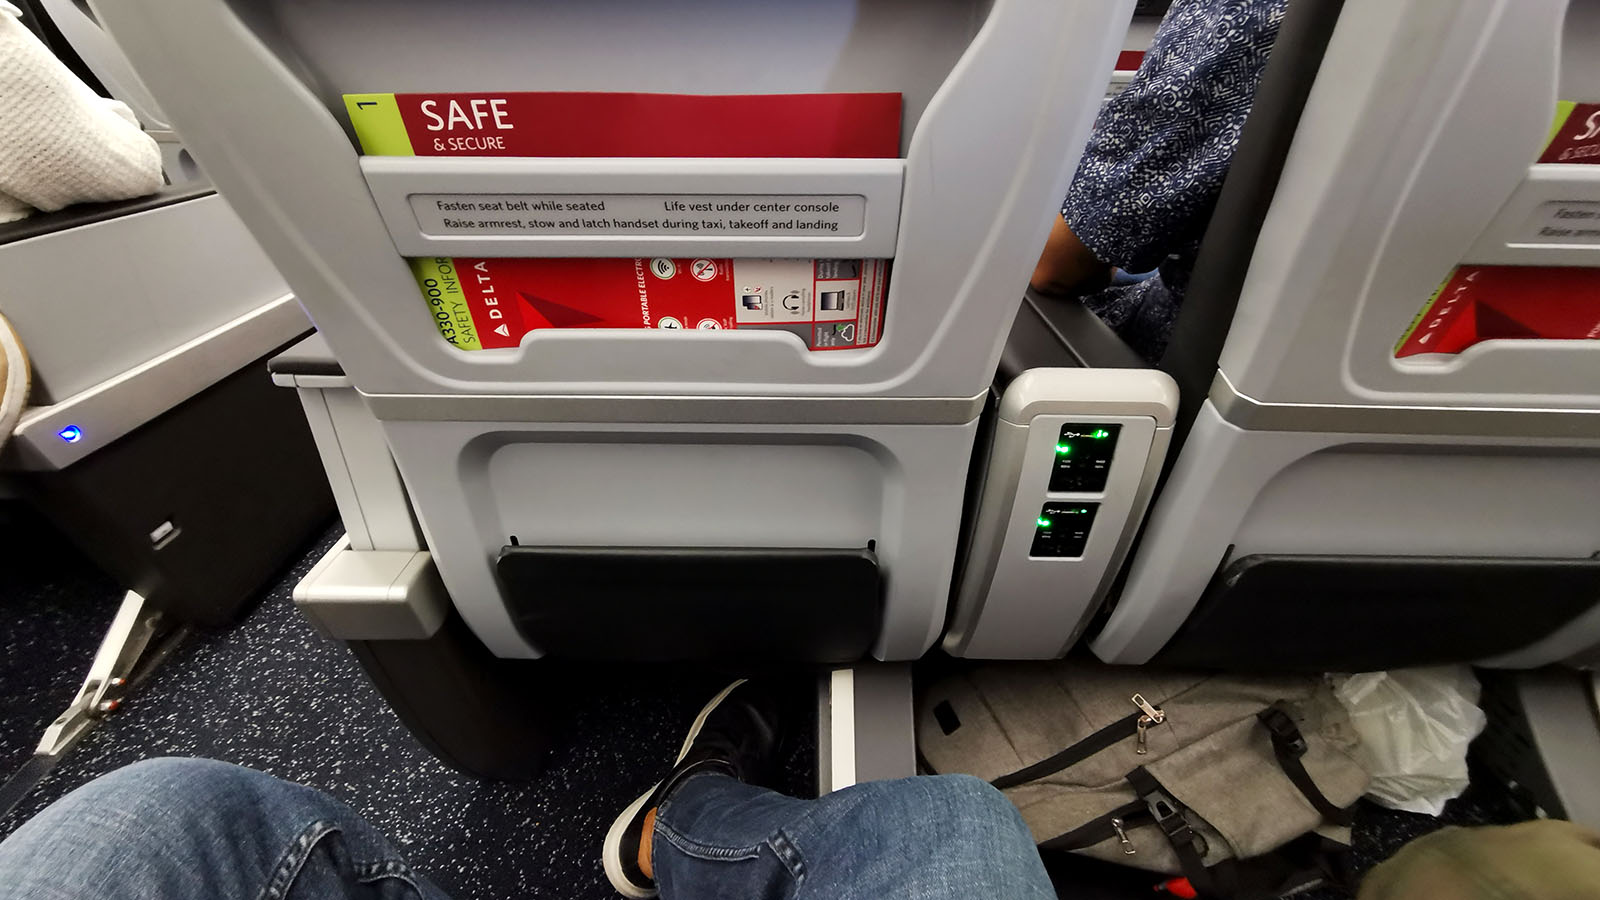 Room to move in Delta A330-900neo Comfort+